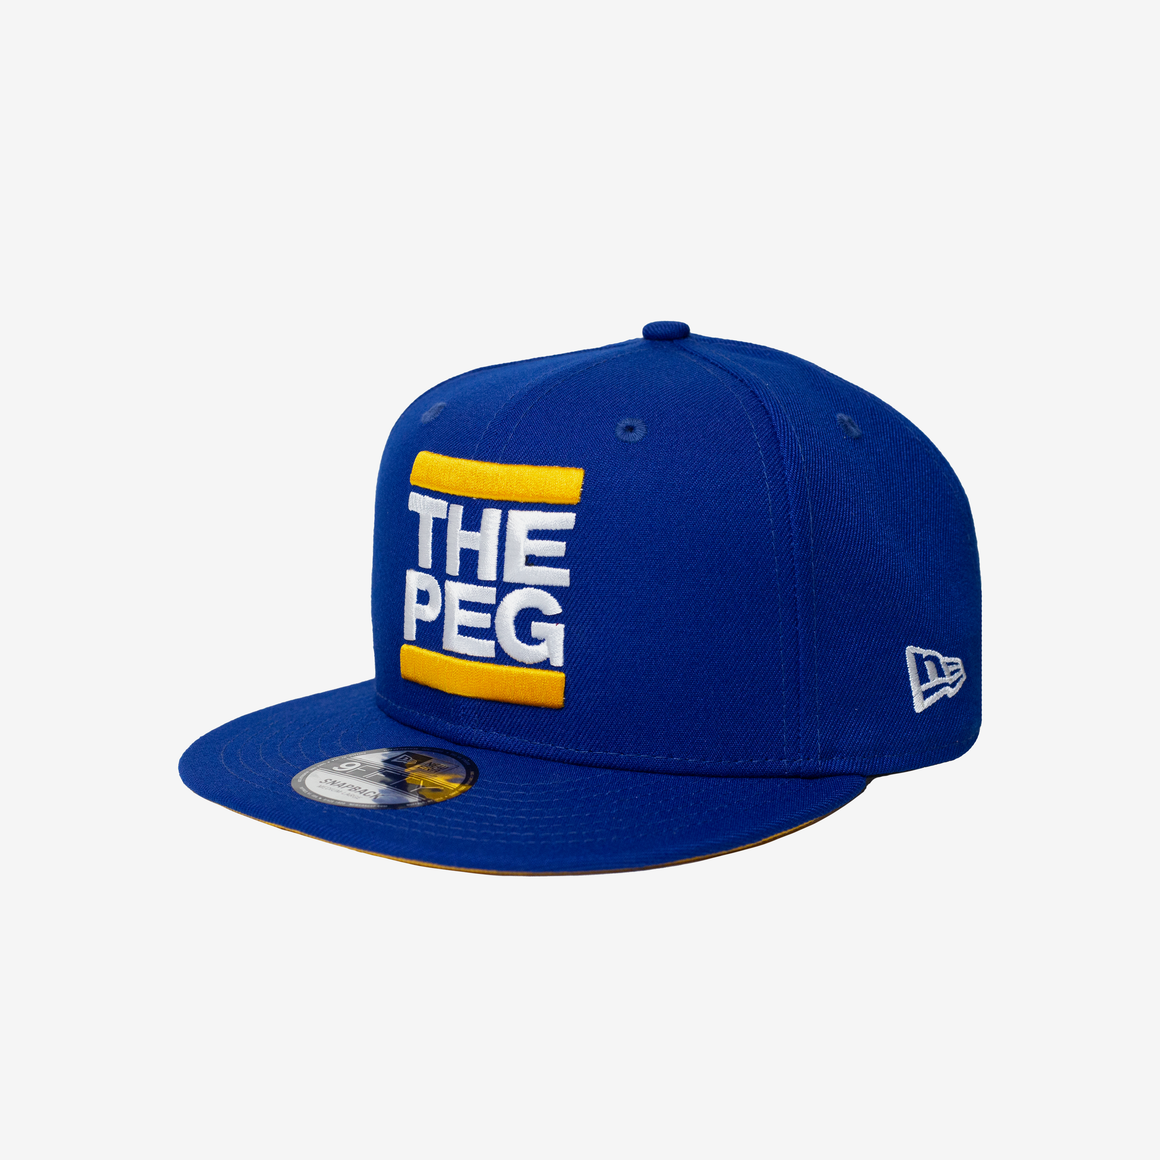 Pre Order: New Era 9FIFTY Classic Snapback (Royal Blue, Vintage Yellow)